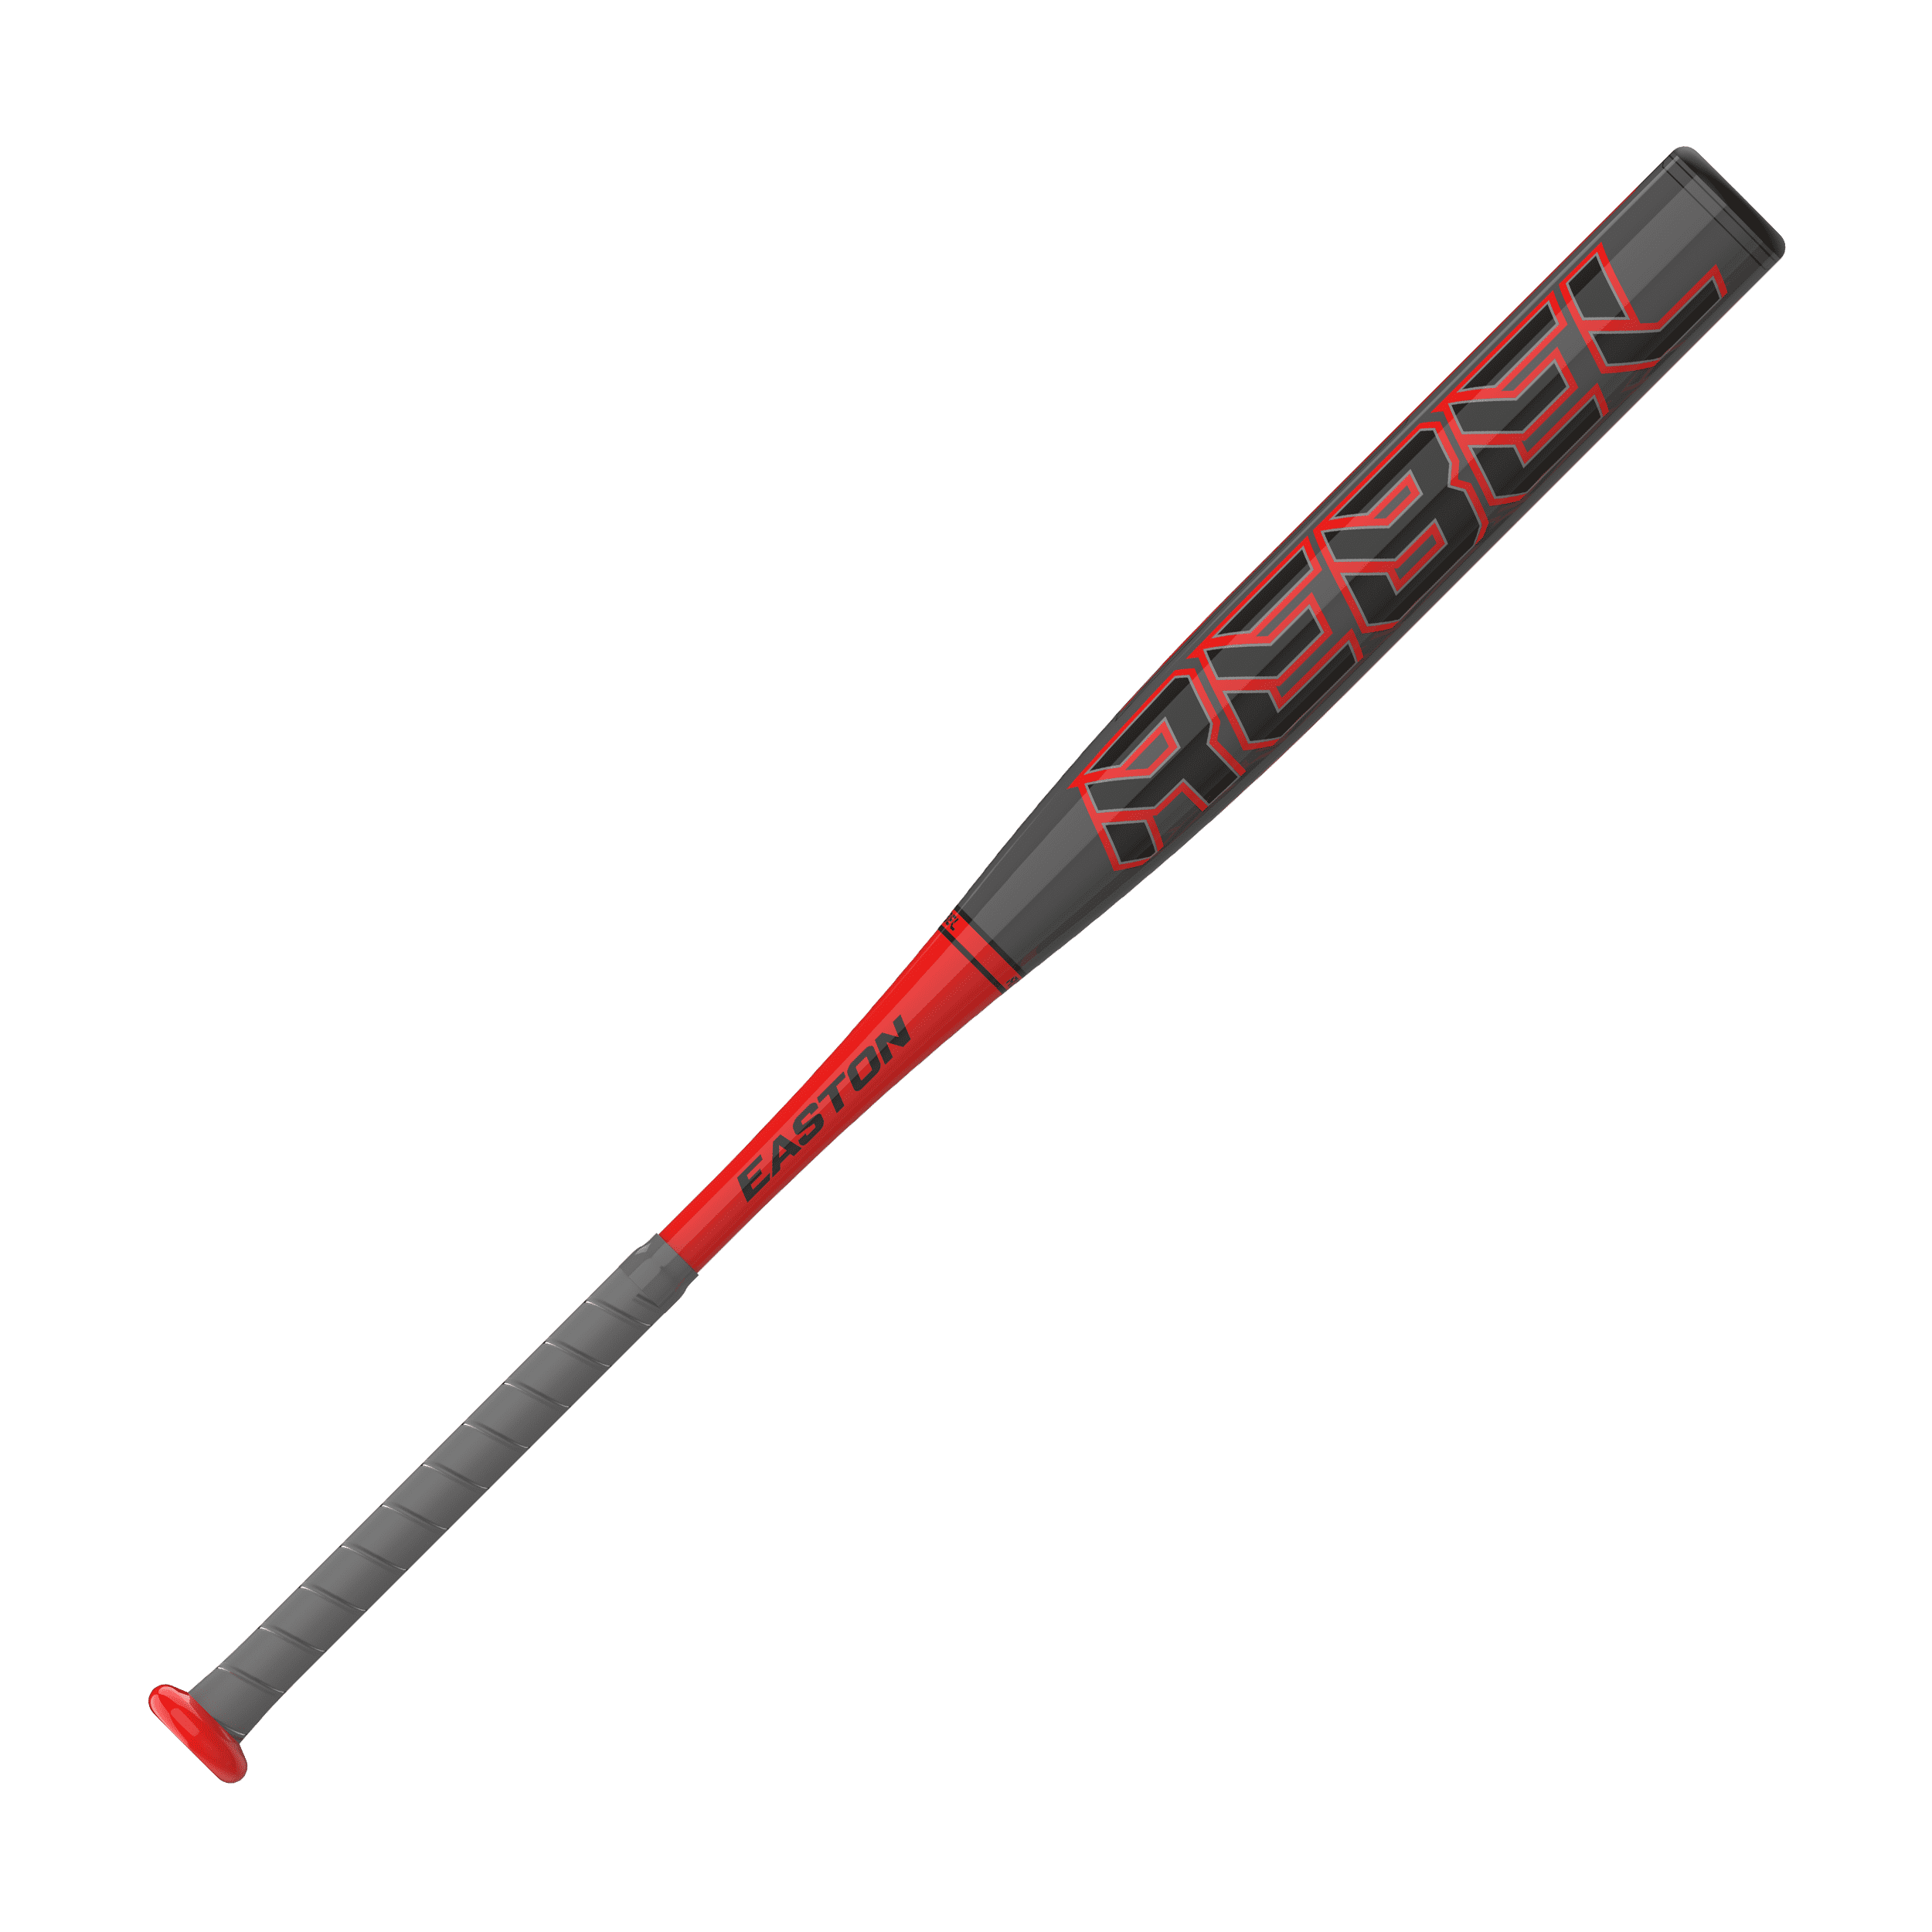 Official SabreCat Slowpitch Softball Wooden Bat 34 inch x 28oz and 30 oz 